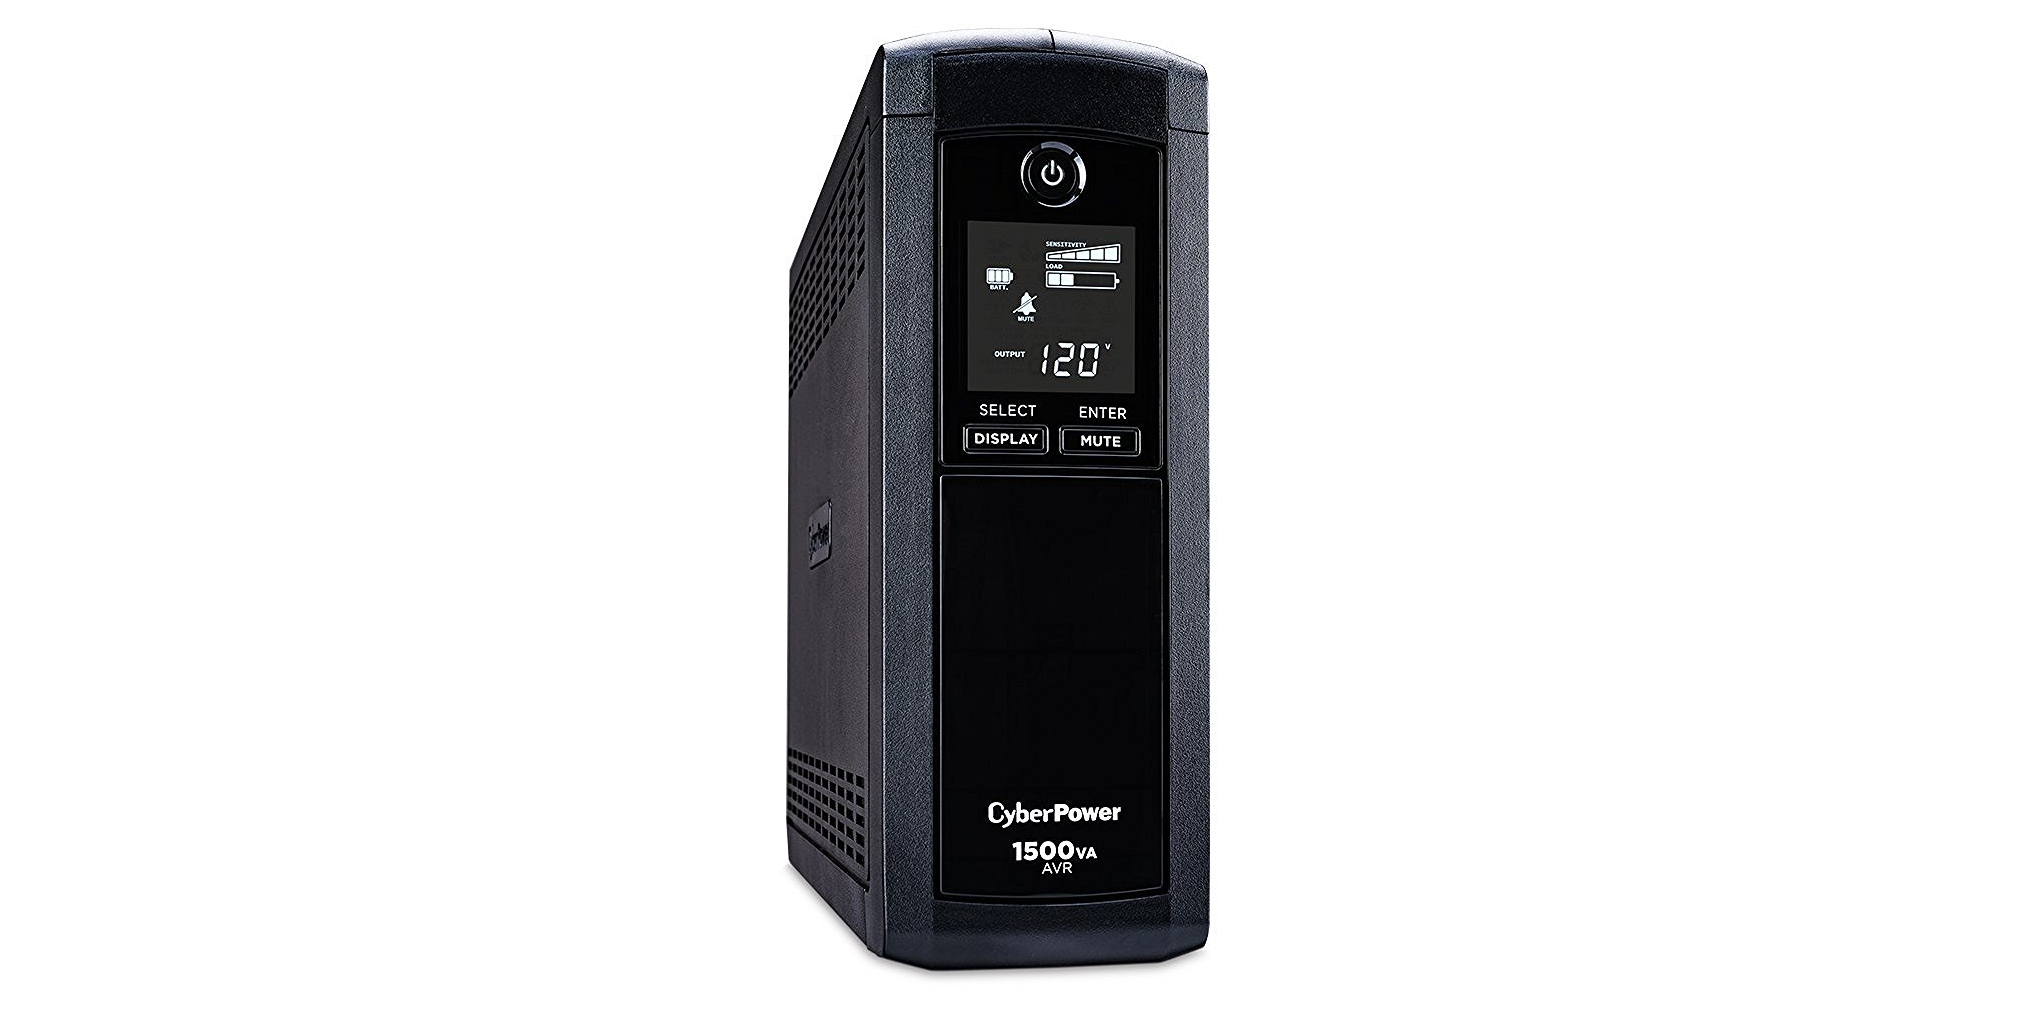 cyberpower battery backup just keeps beeping